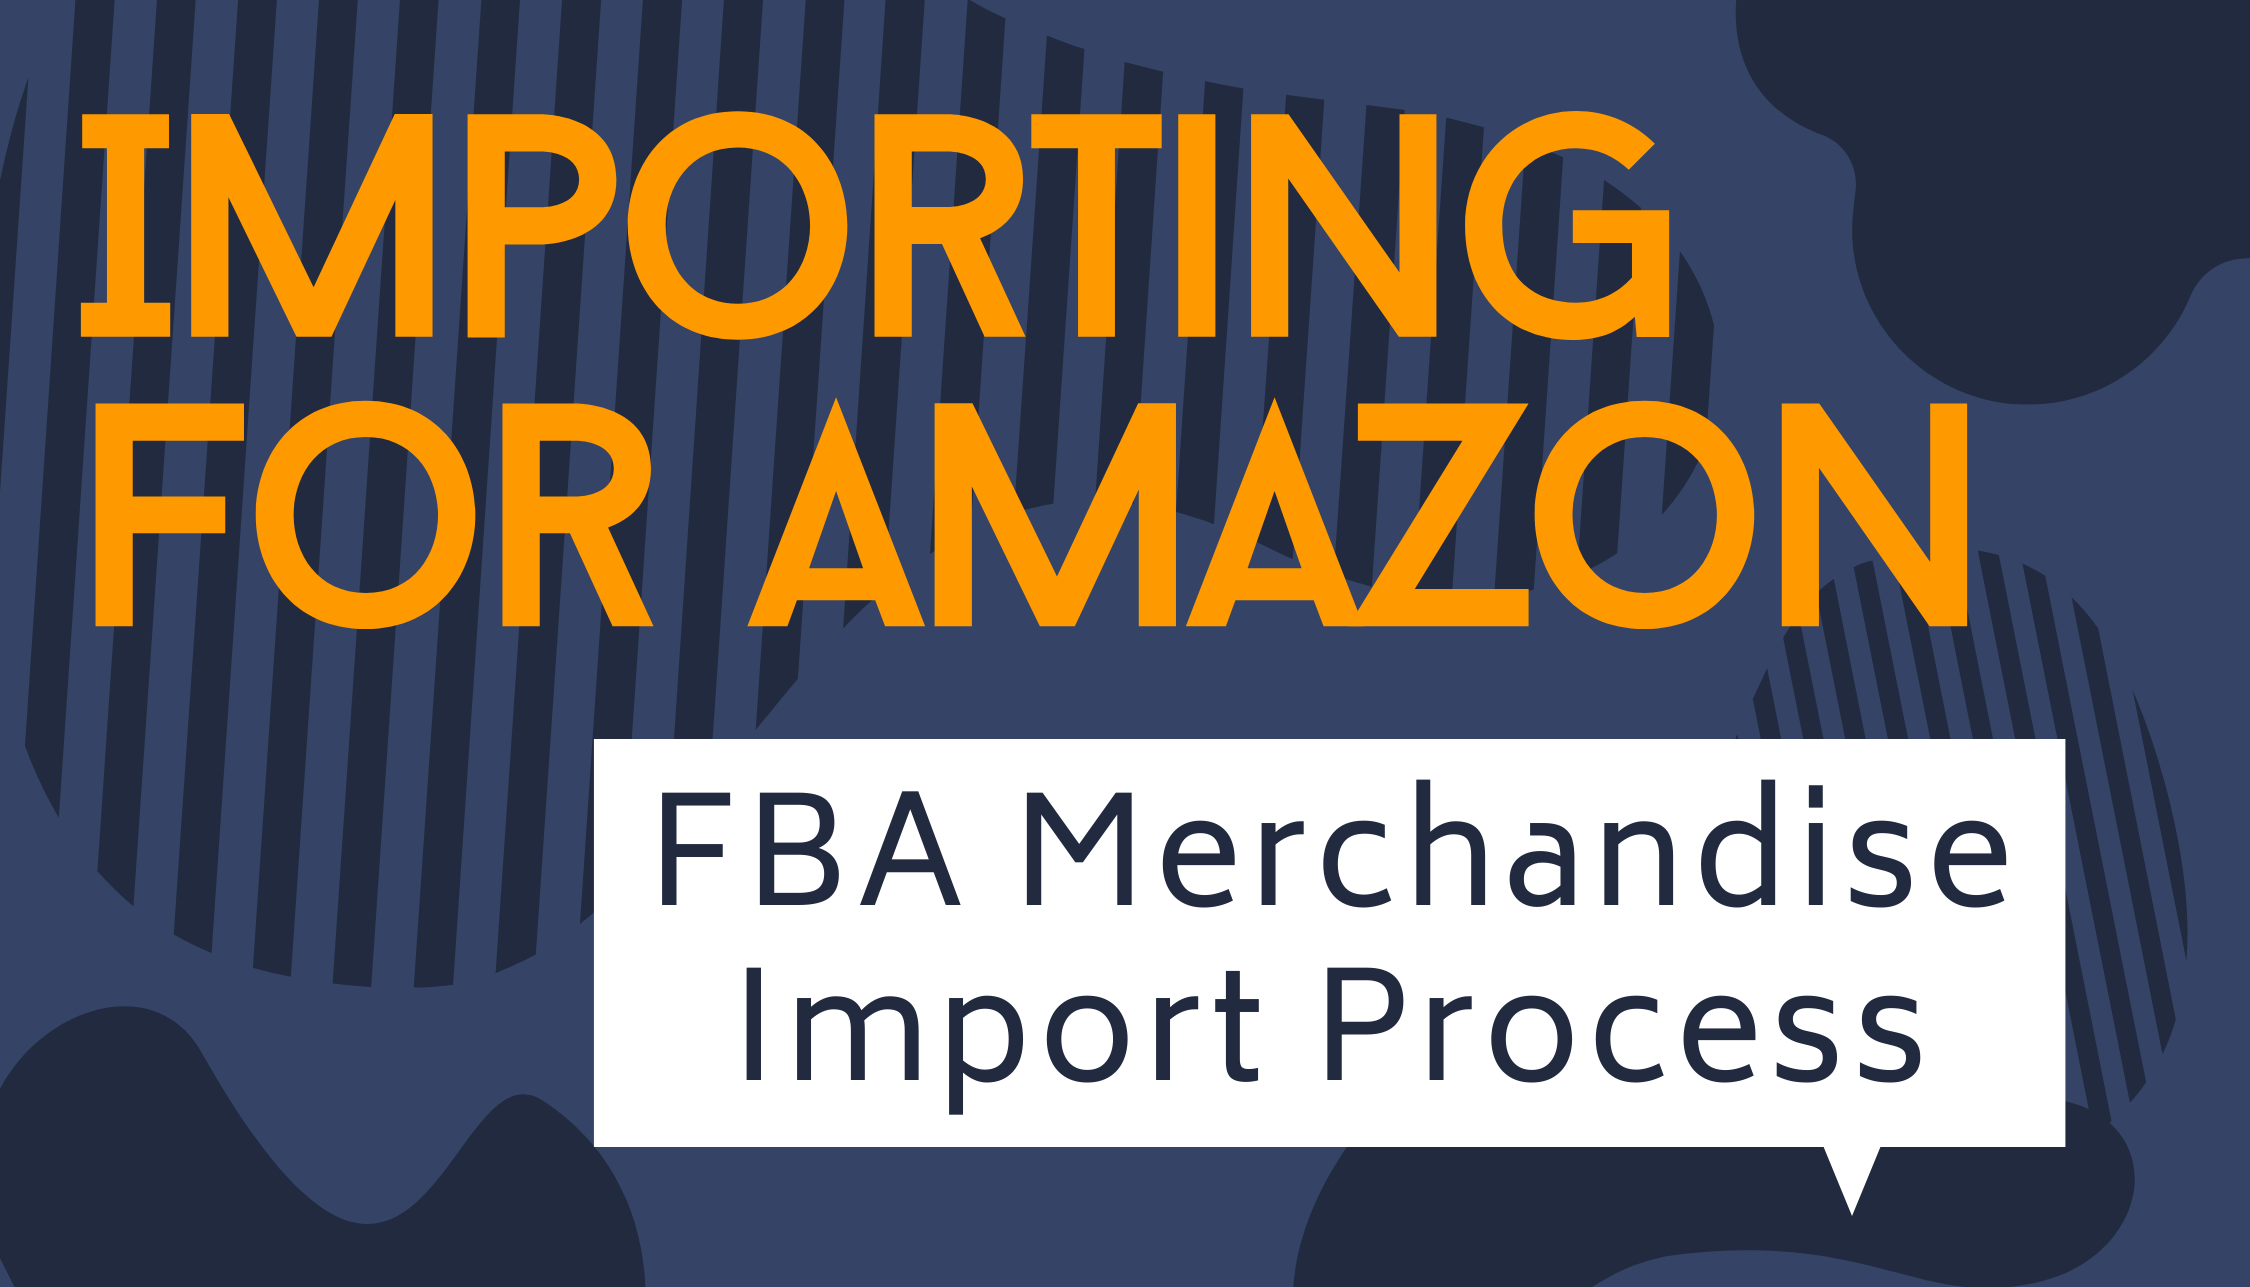 Importing for Amazon: FBA Merchandise Import Process